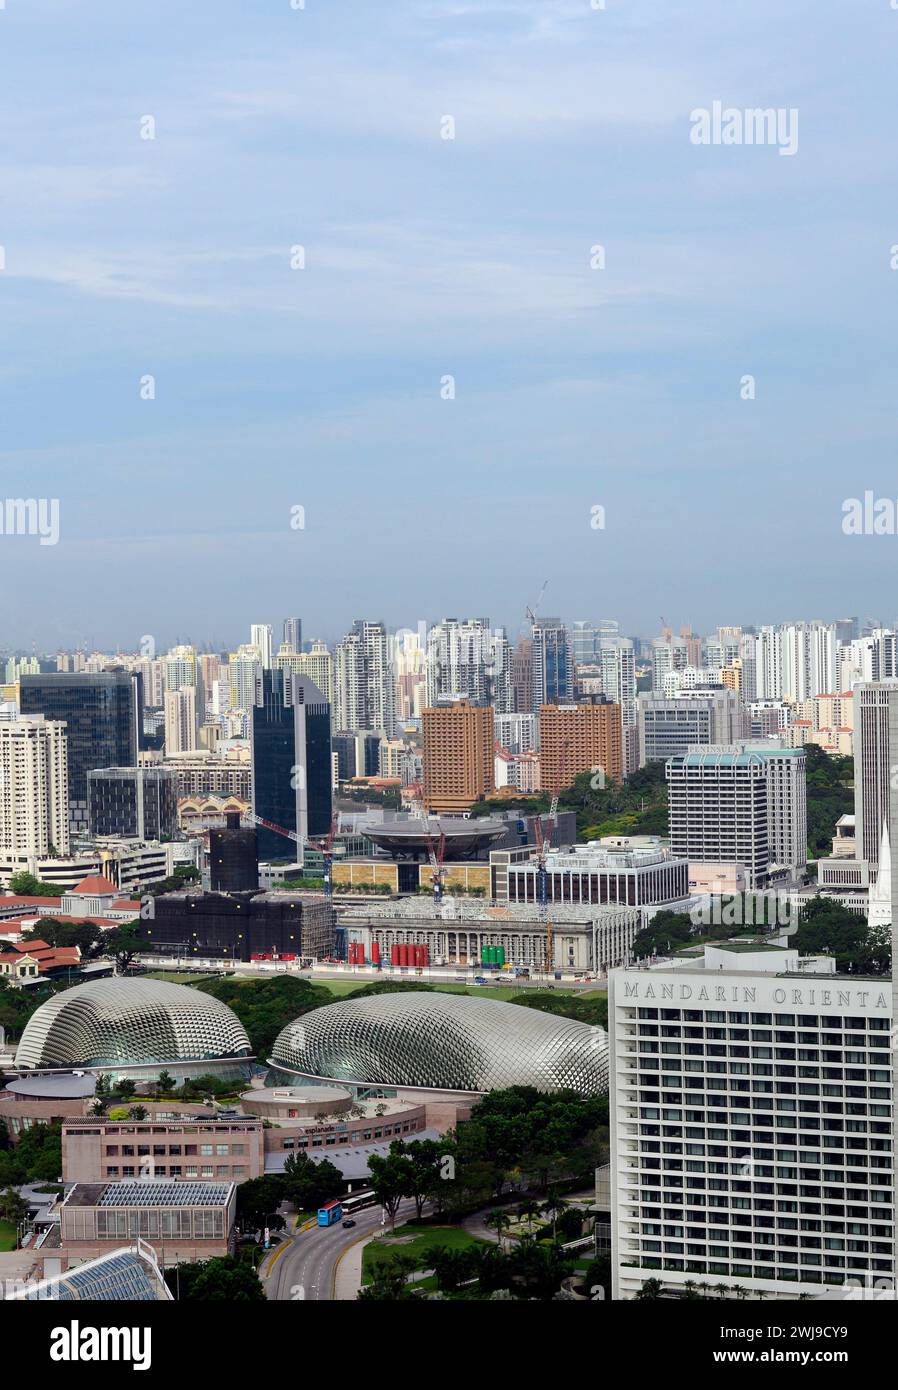 A view of the Esplanade - Theatres on the Bay and the National Gallery in Singapore. Stock Photo